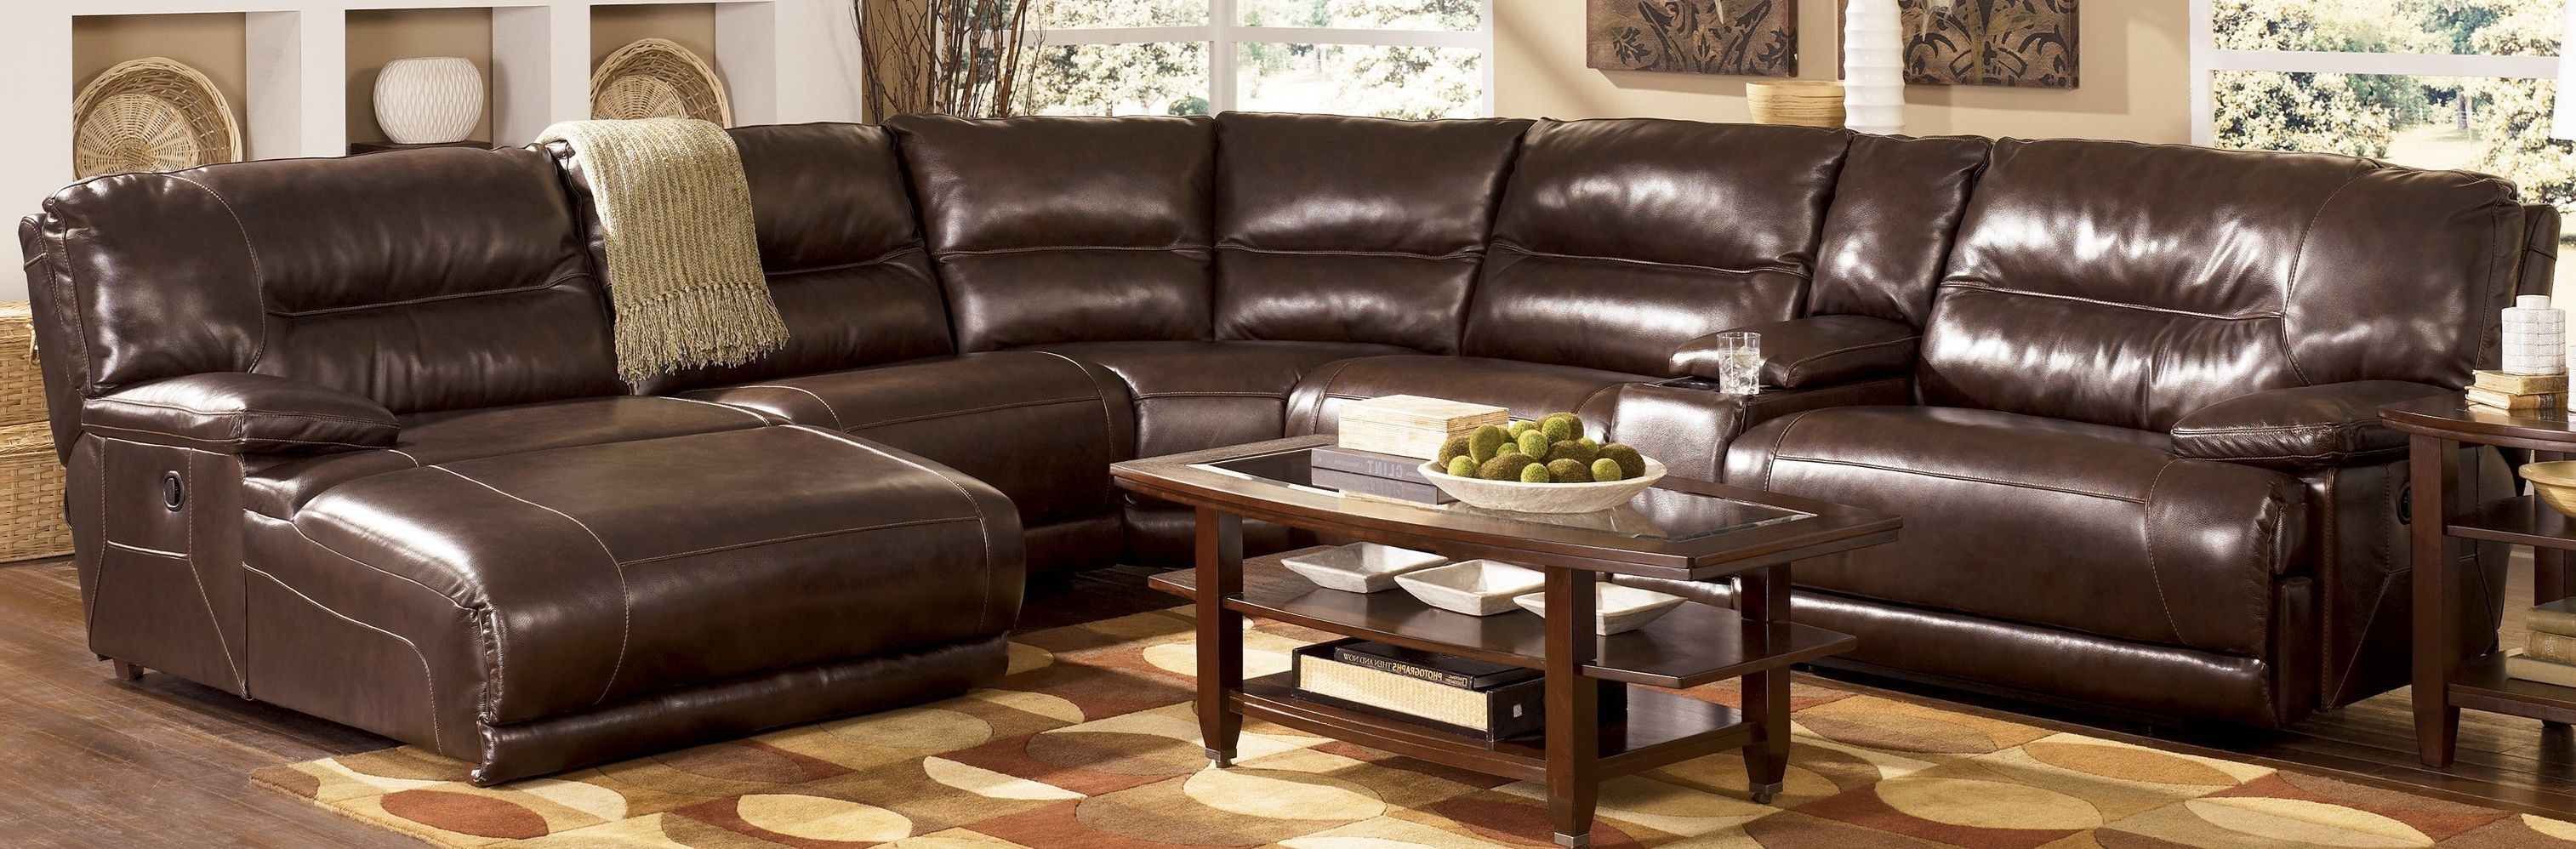 Sofa : Sectional With Recliner And Chaise Lounge Couch Covers For In Most Current Leather Lounge Sofas (View 15 of 15)